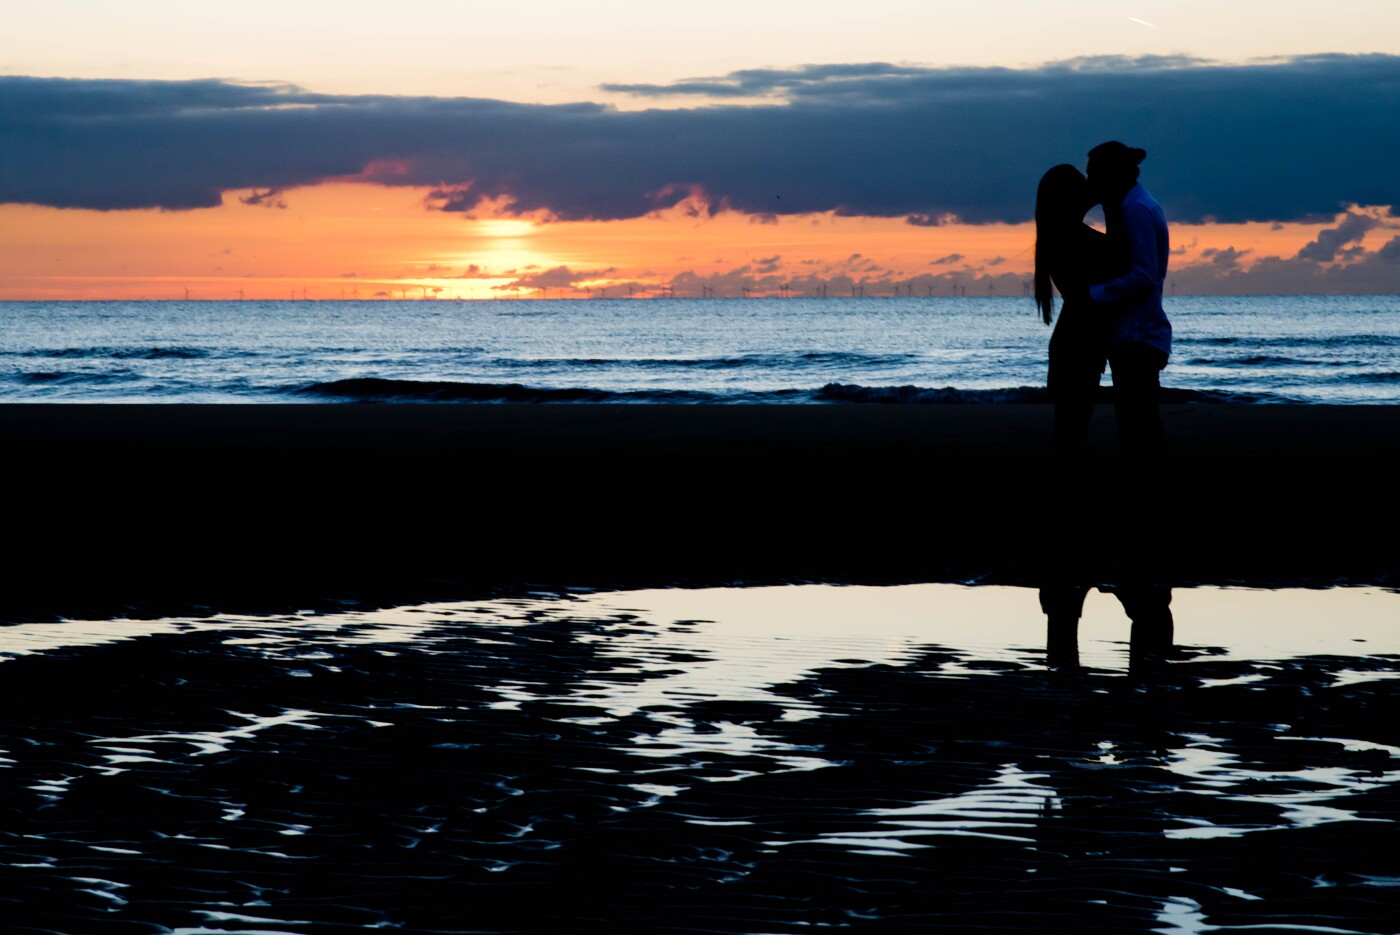 He asked and she said "yes"!<br />
It was the perfect location, moment and sunset in the beach in Zandvoort. <br />
Boxie & Mia getting married next year. And I am looking forward for shooting there wedding.